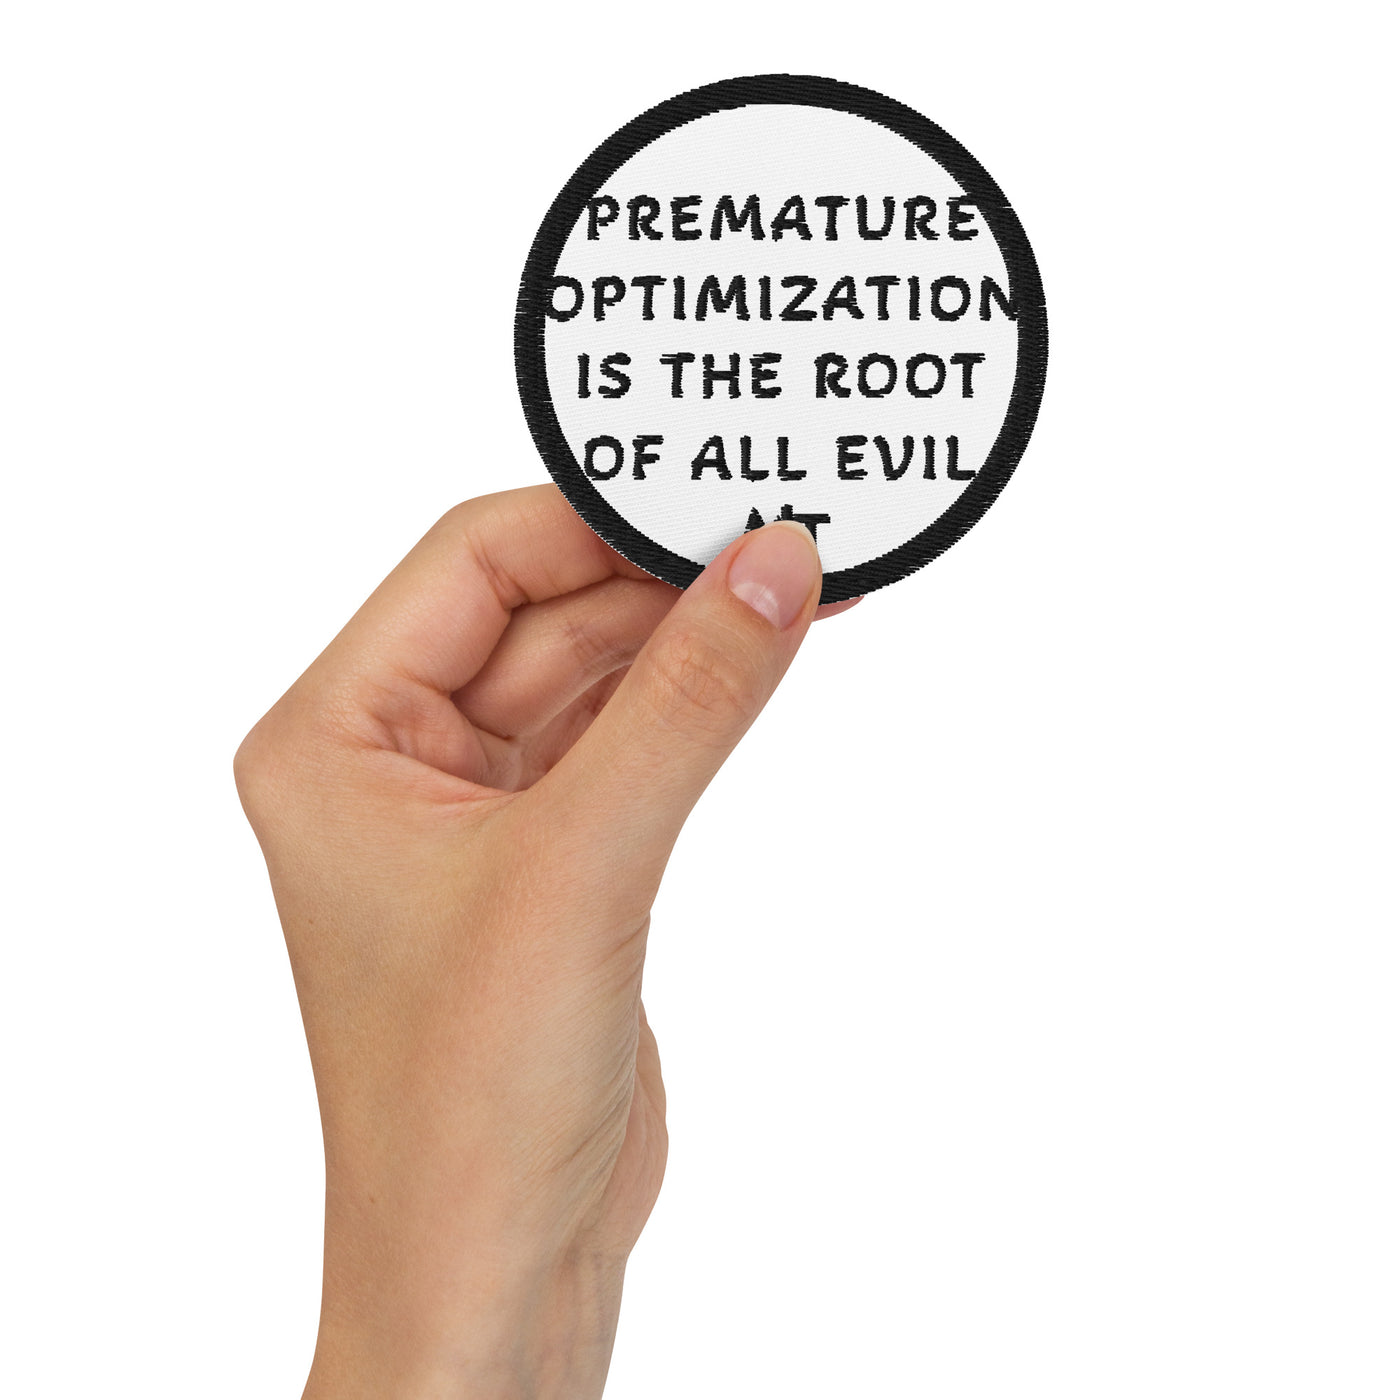 Premature Optimization is the Root of All Evil - Embroidered patches